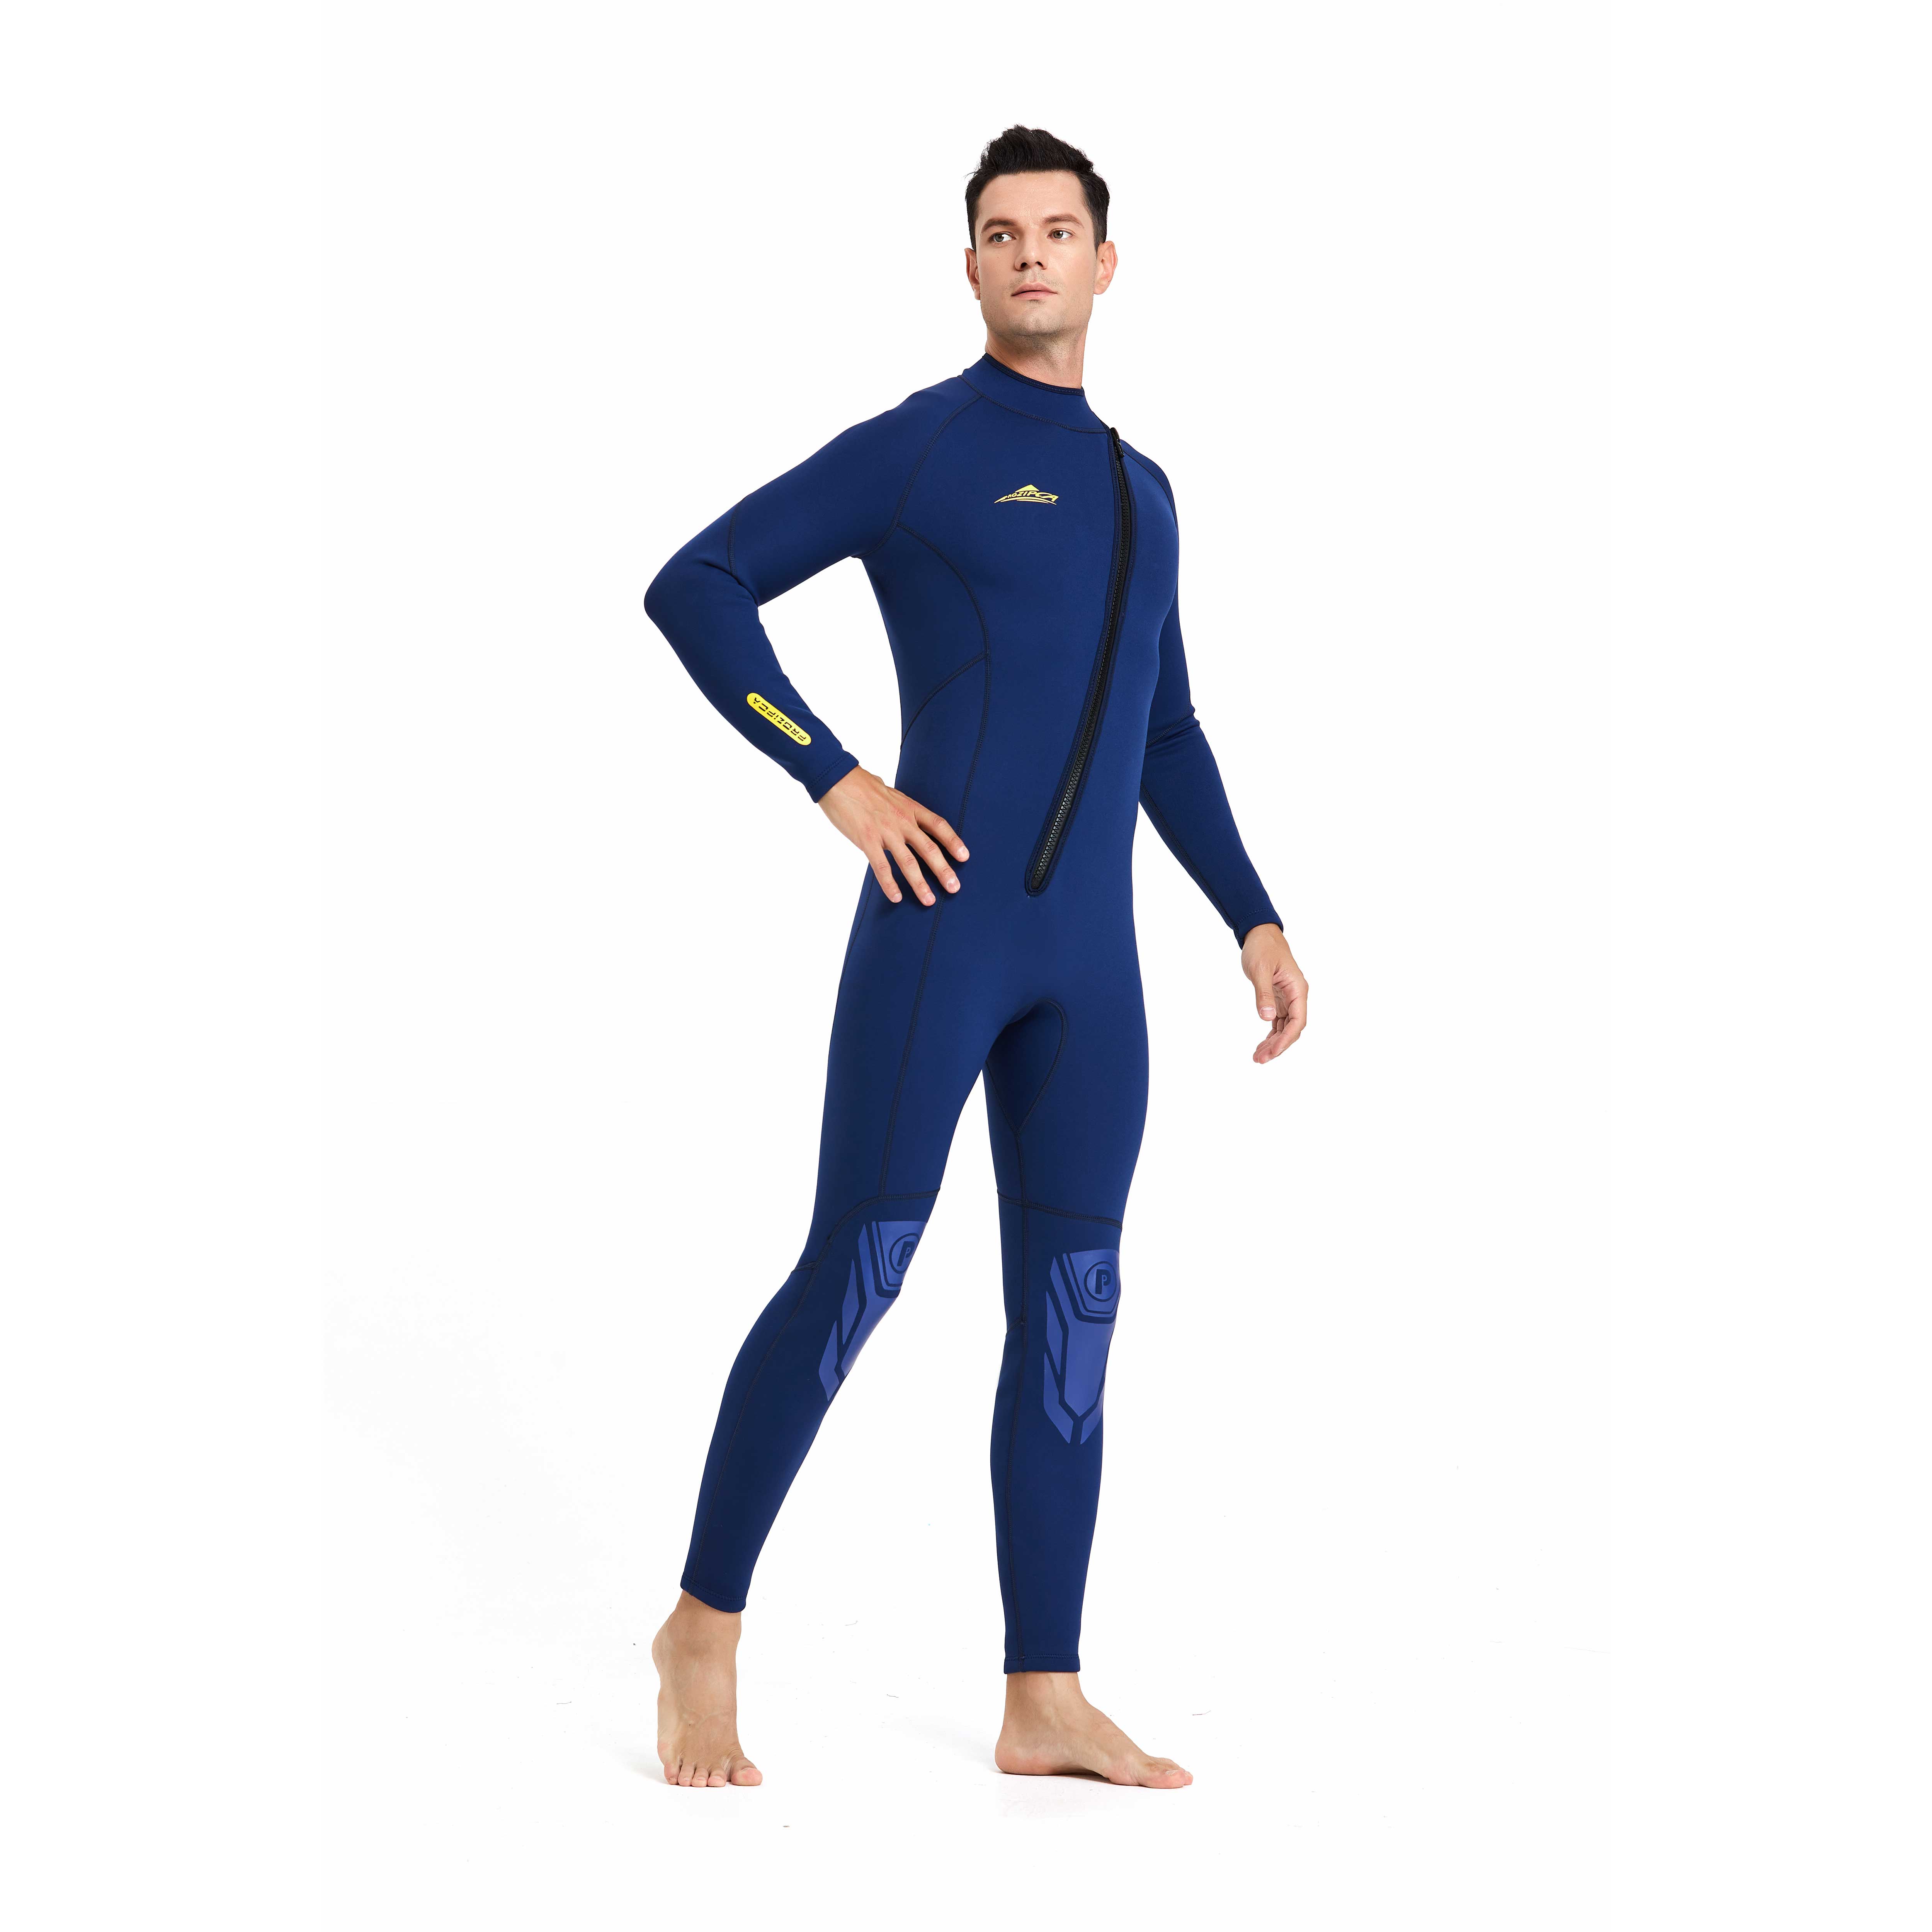 Customized Full Body Tight Surf Snorkeling Suit Chest Zipper Long Sleeve Breathable Yamamoto Neoprene 3Mm Men Diving Wetsuit